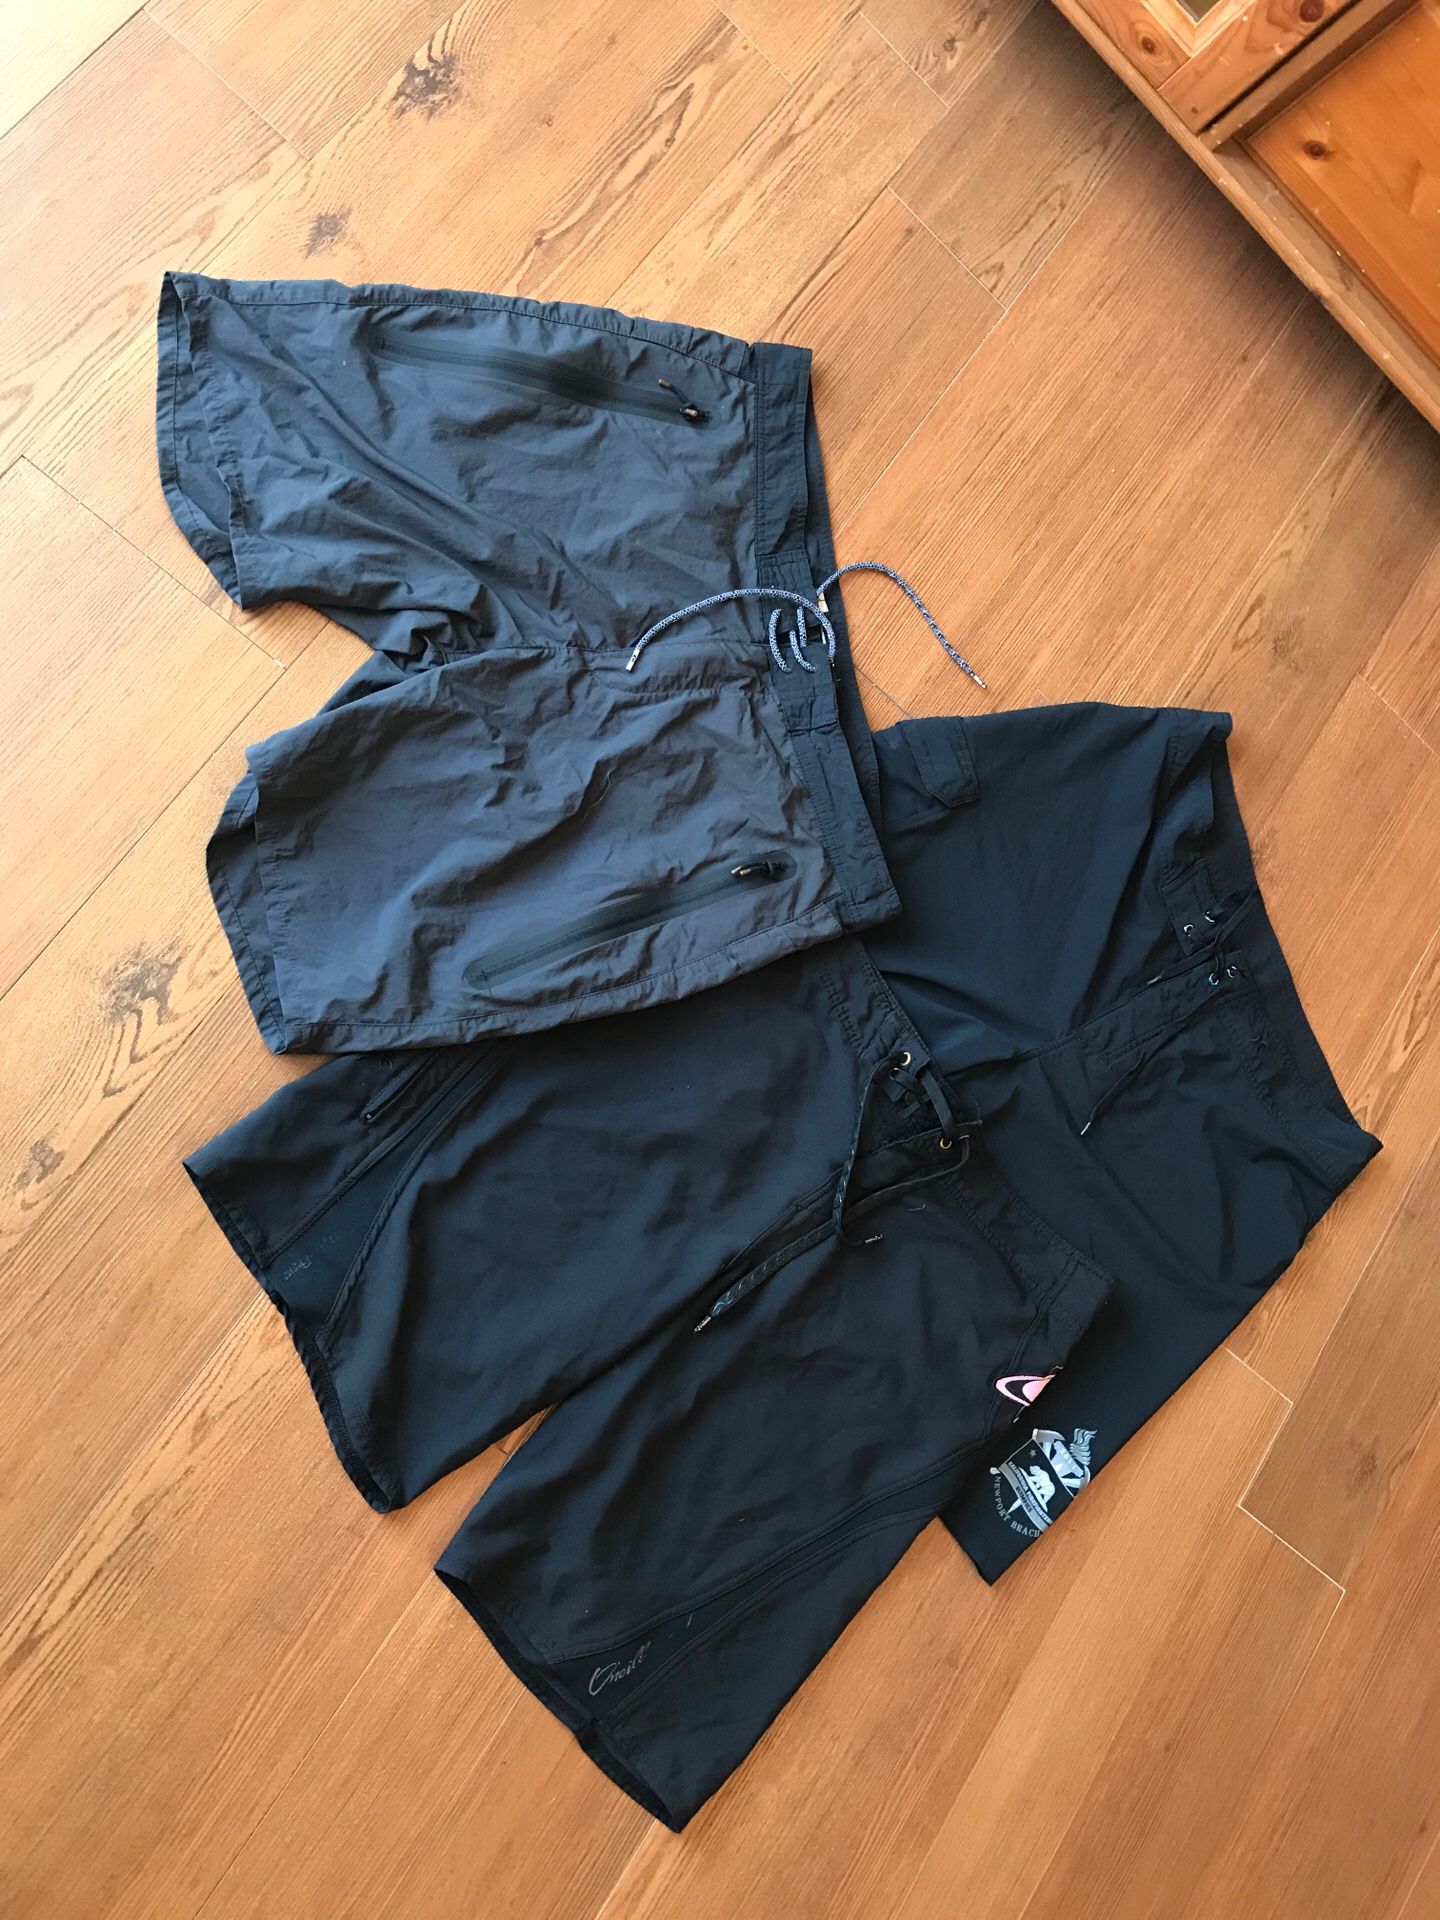 3 lot of surf/boogie board shorts